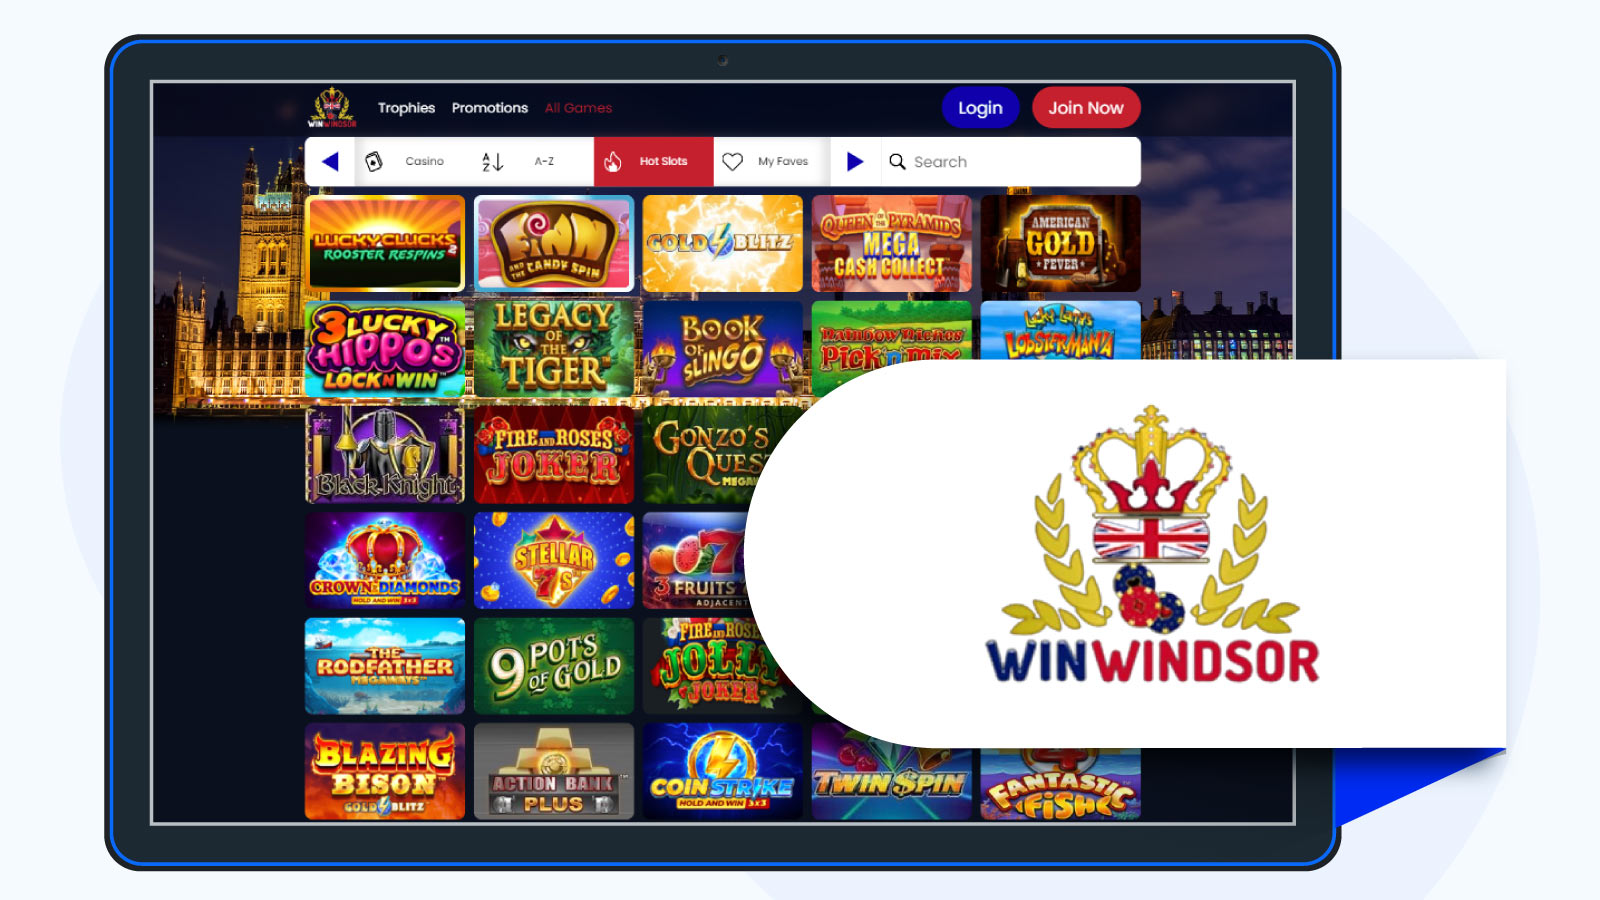 Win-Windsor-High-bonus-money-values-with-spins-attached